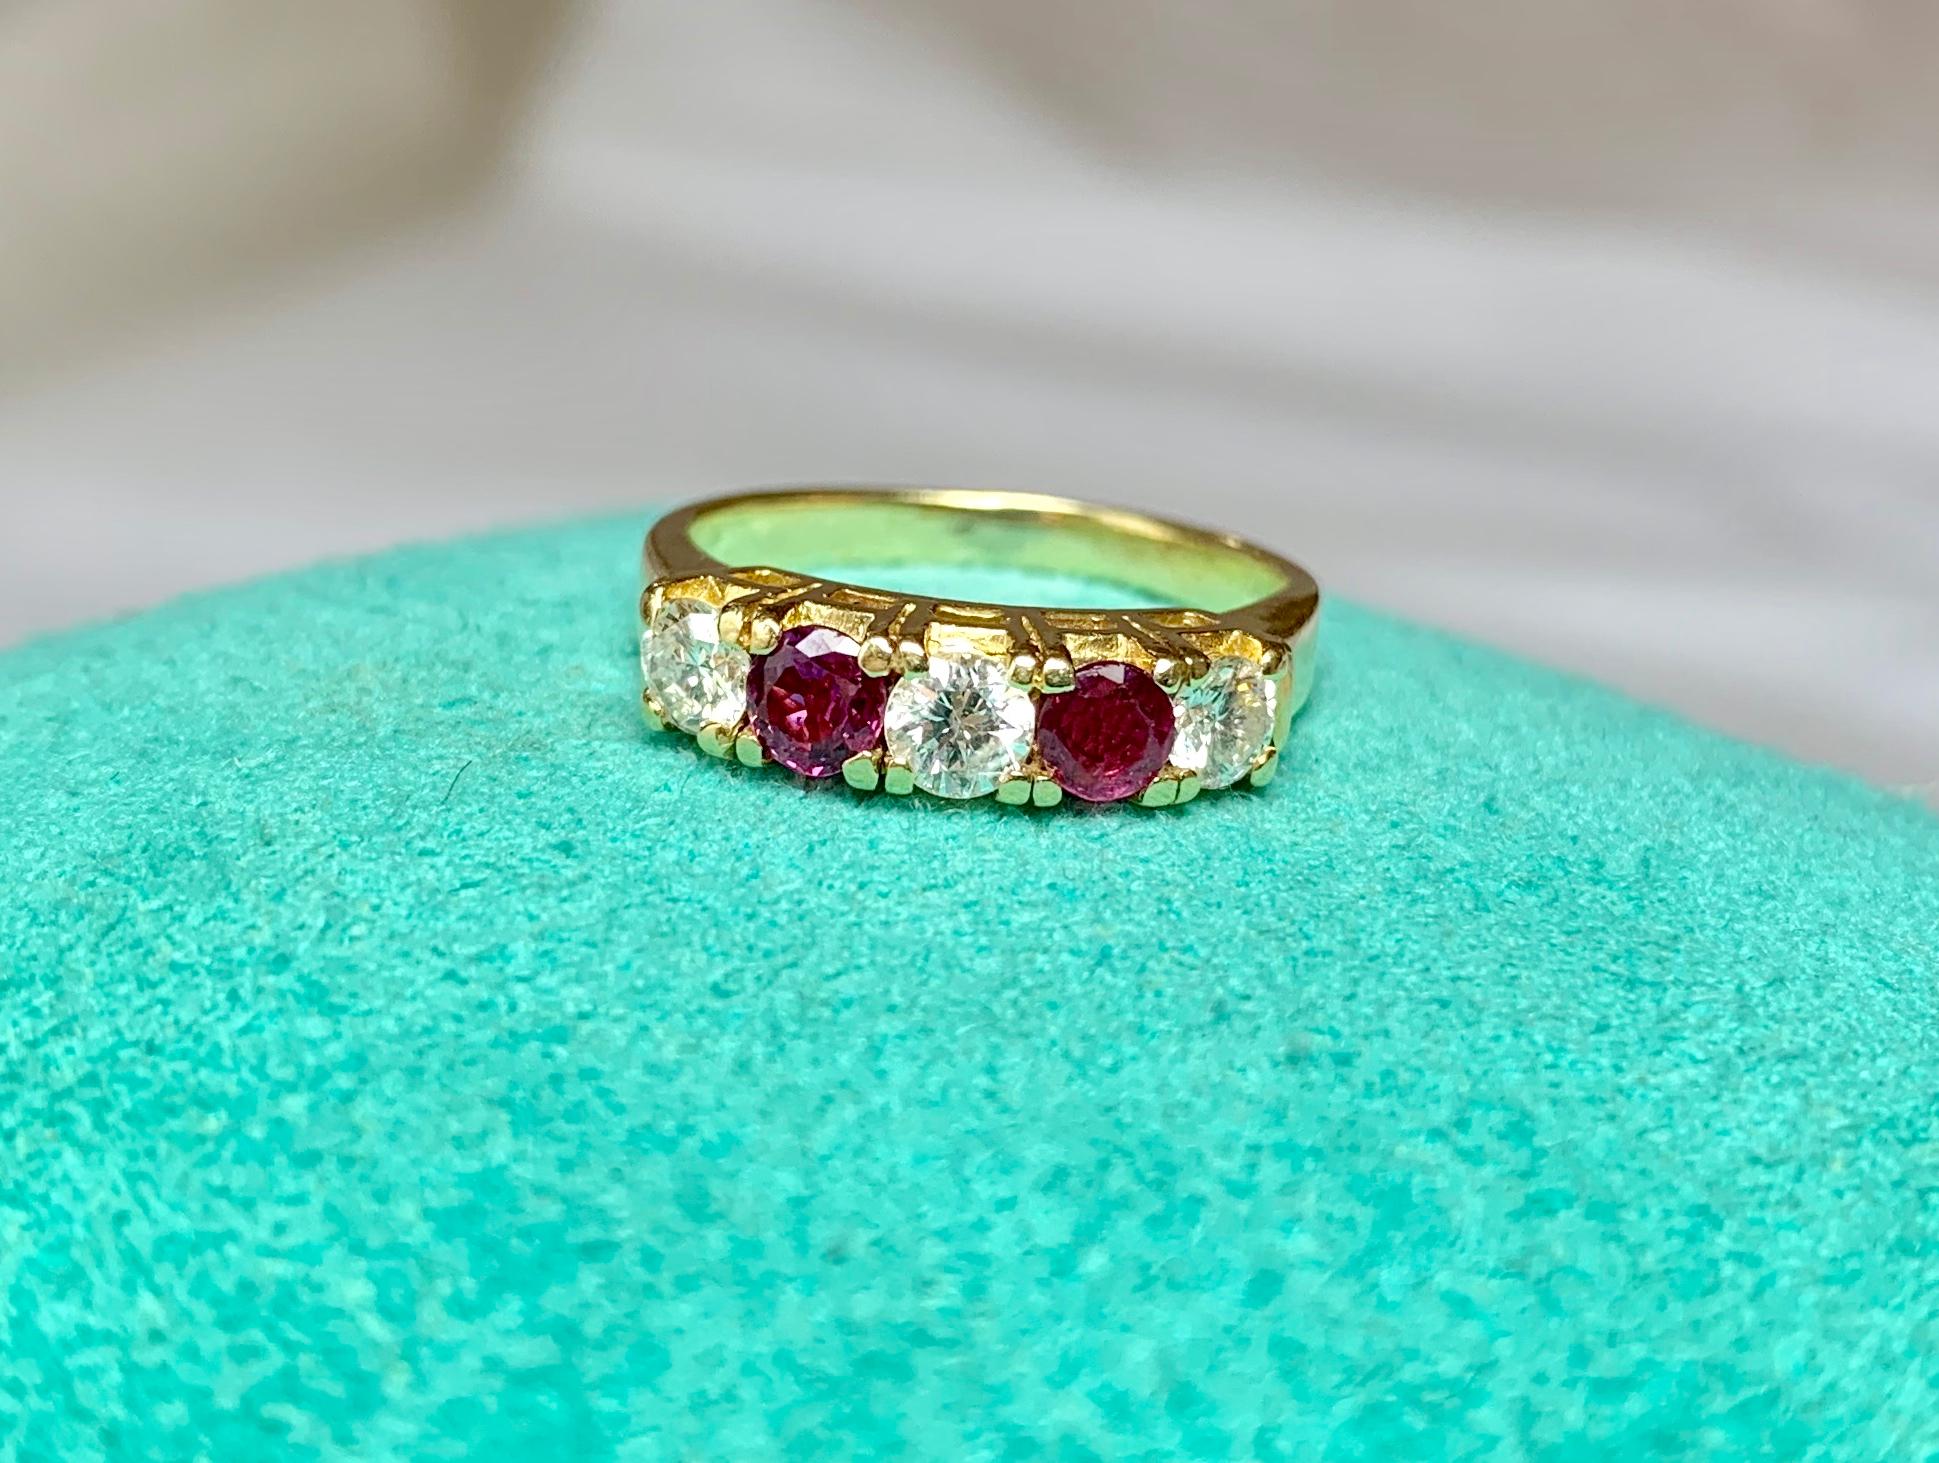 A classic Ruby and Diamond Wedding Engagement Band Ring.  The vivid red Rubies and sparkling white Diamonds set in 14 Karat Yellow Gold are just a romantic wonderful combination.   The diamonds are gorgeous and are G color - very white!  The rubies